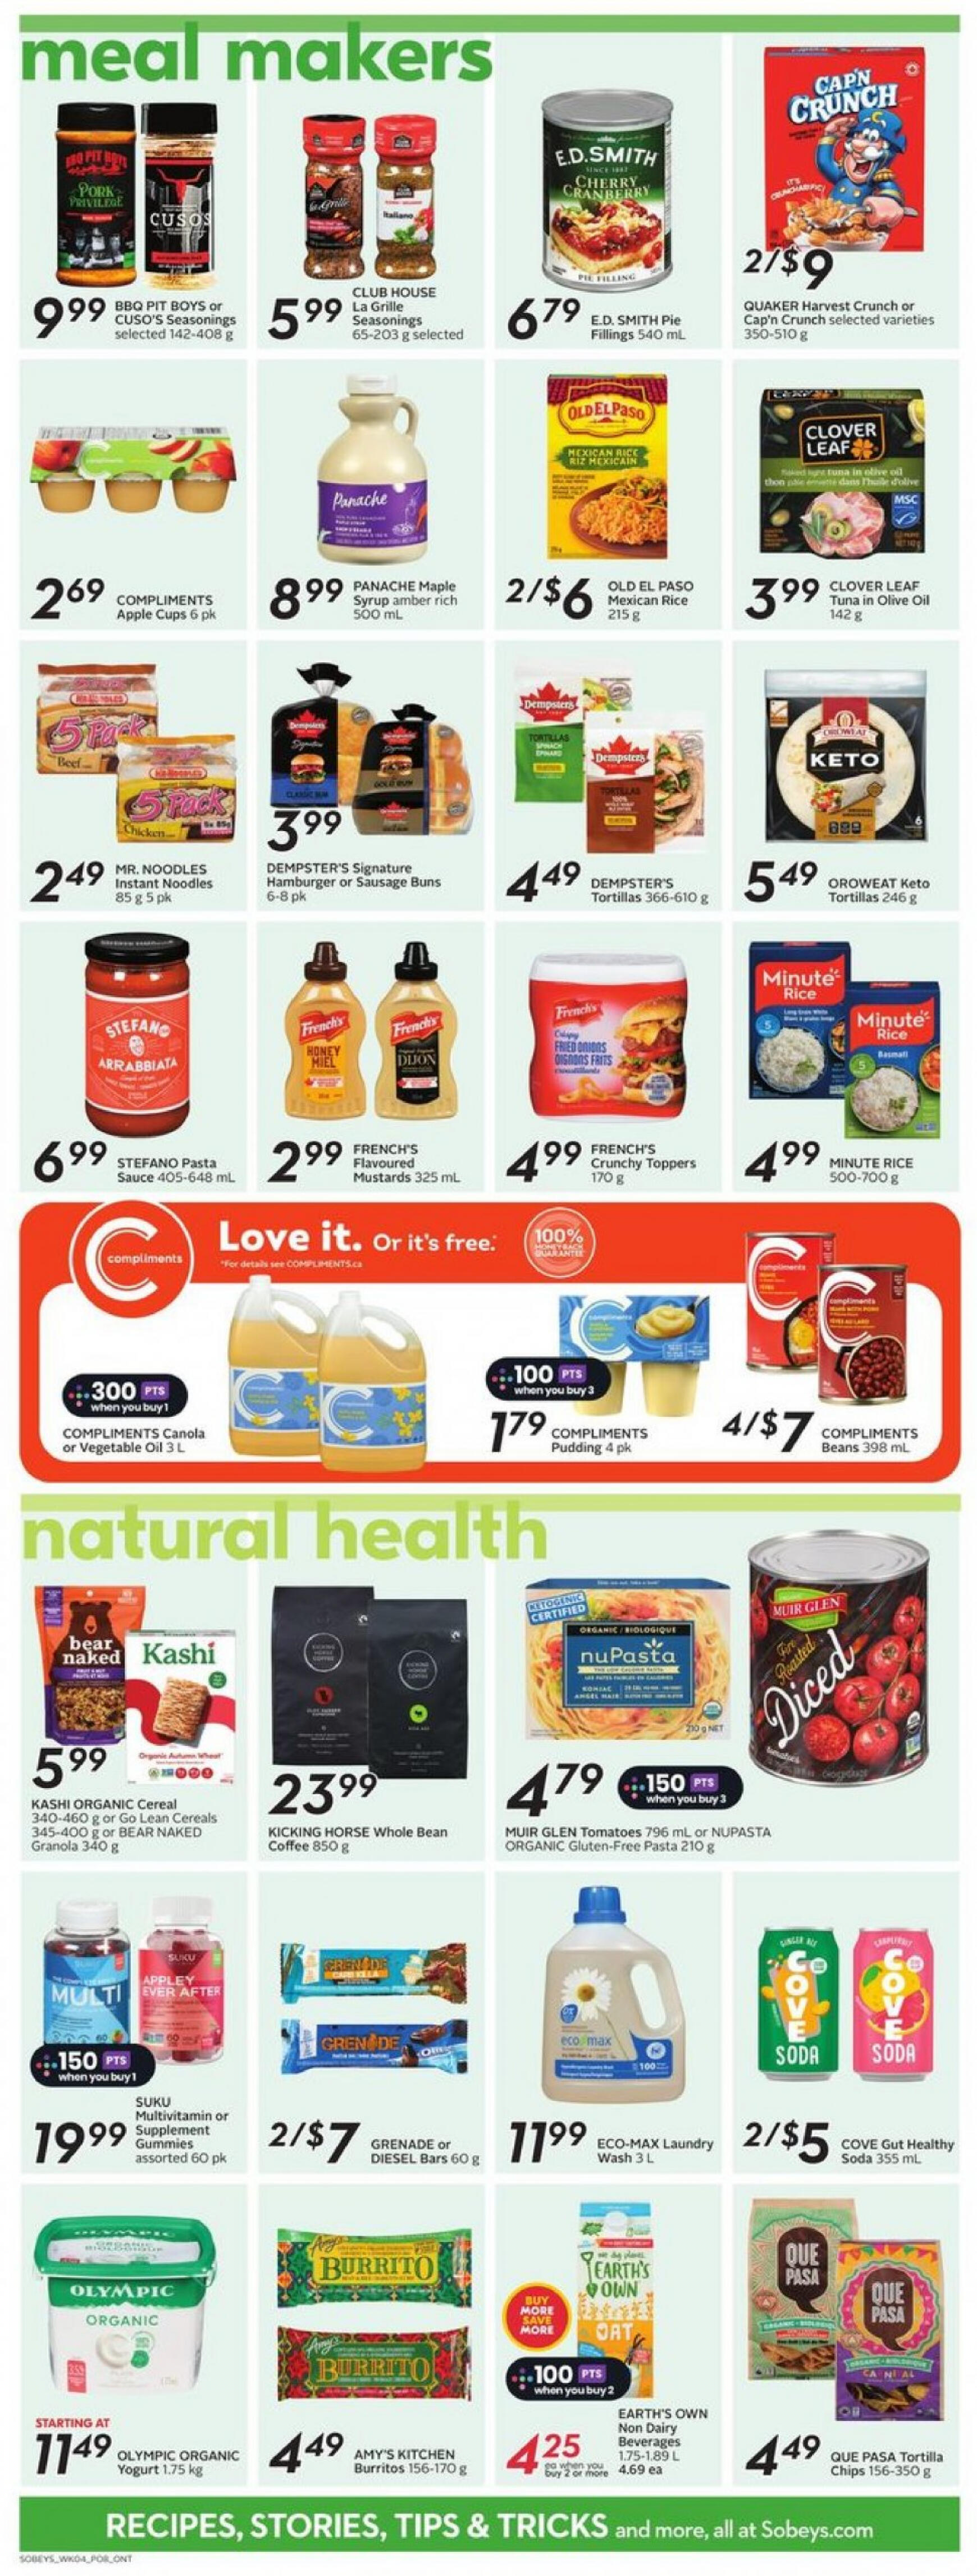 sobeys - Sobeys - Weekly Flyer - Ontario flyer current 23.05. - 29.05. - page: 17